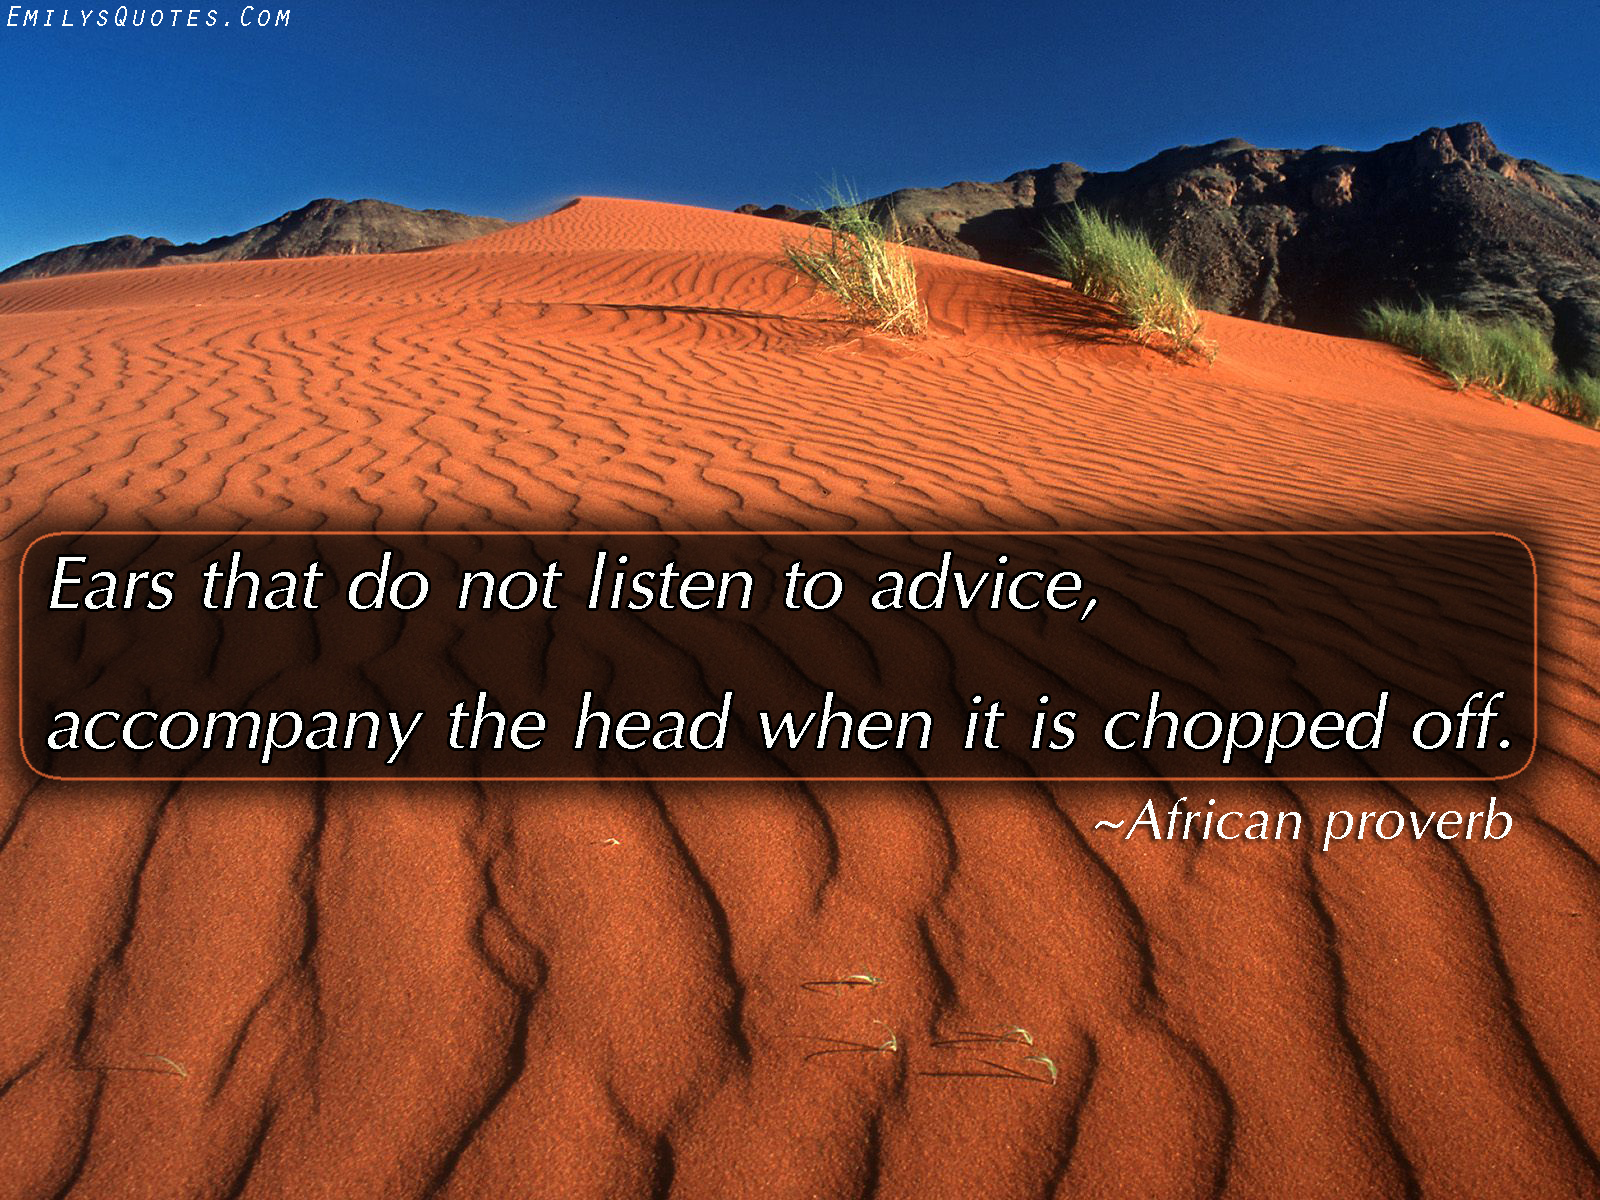 Ears that do not listen to advice, accompany the head when it is chopped off